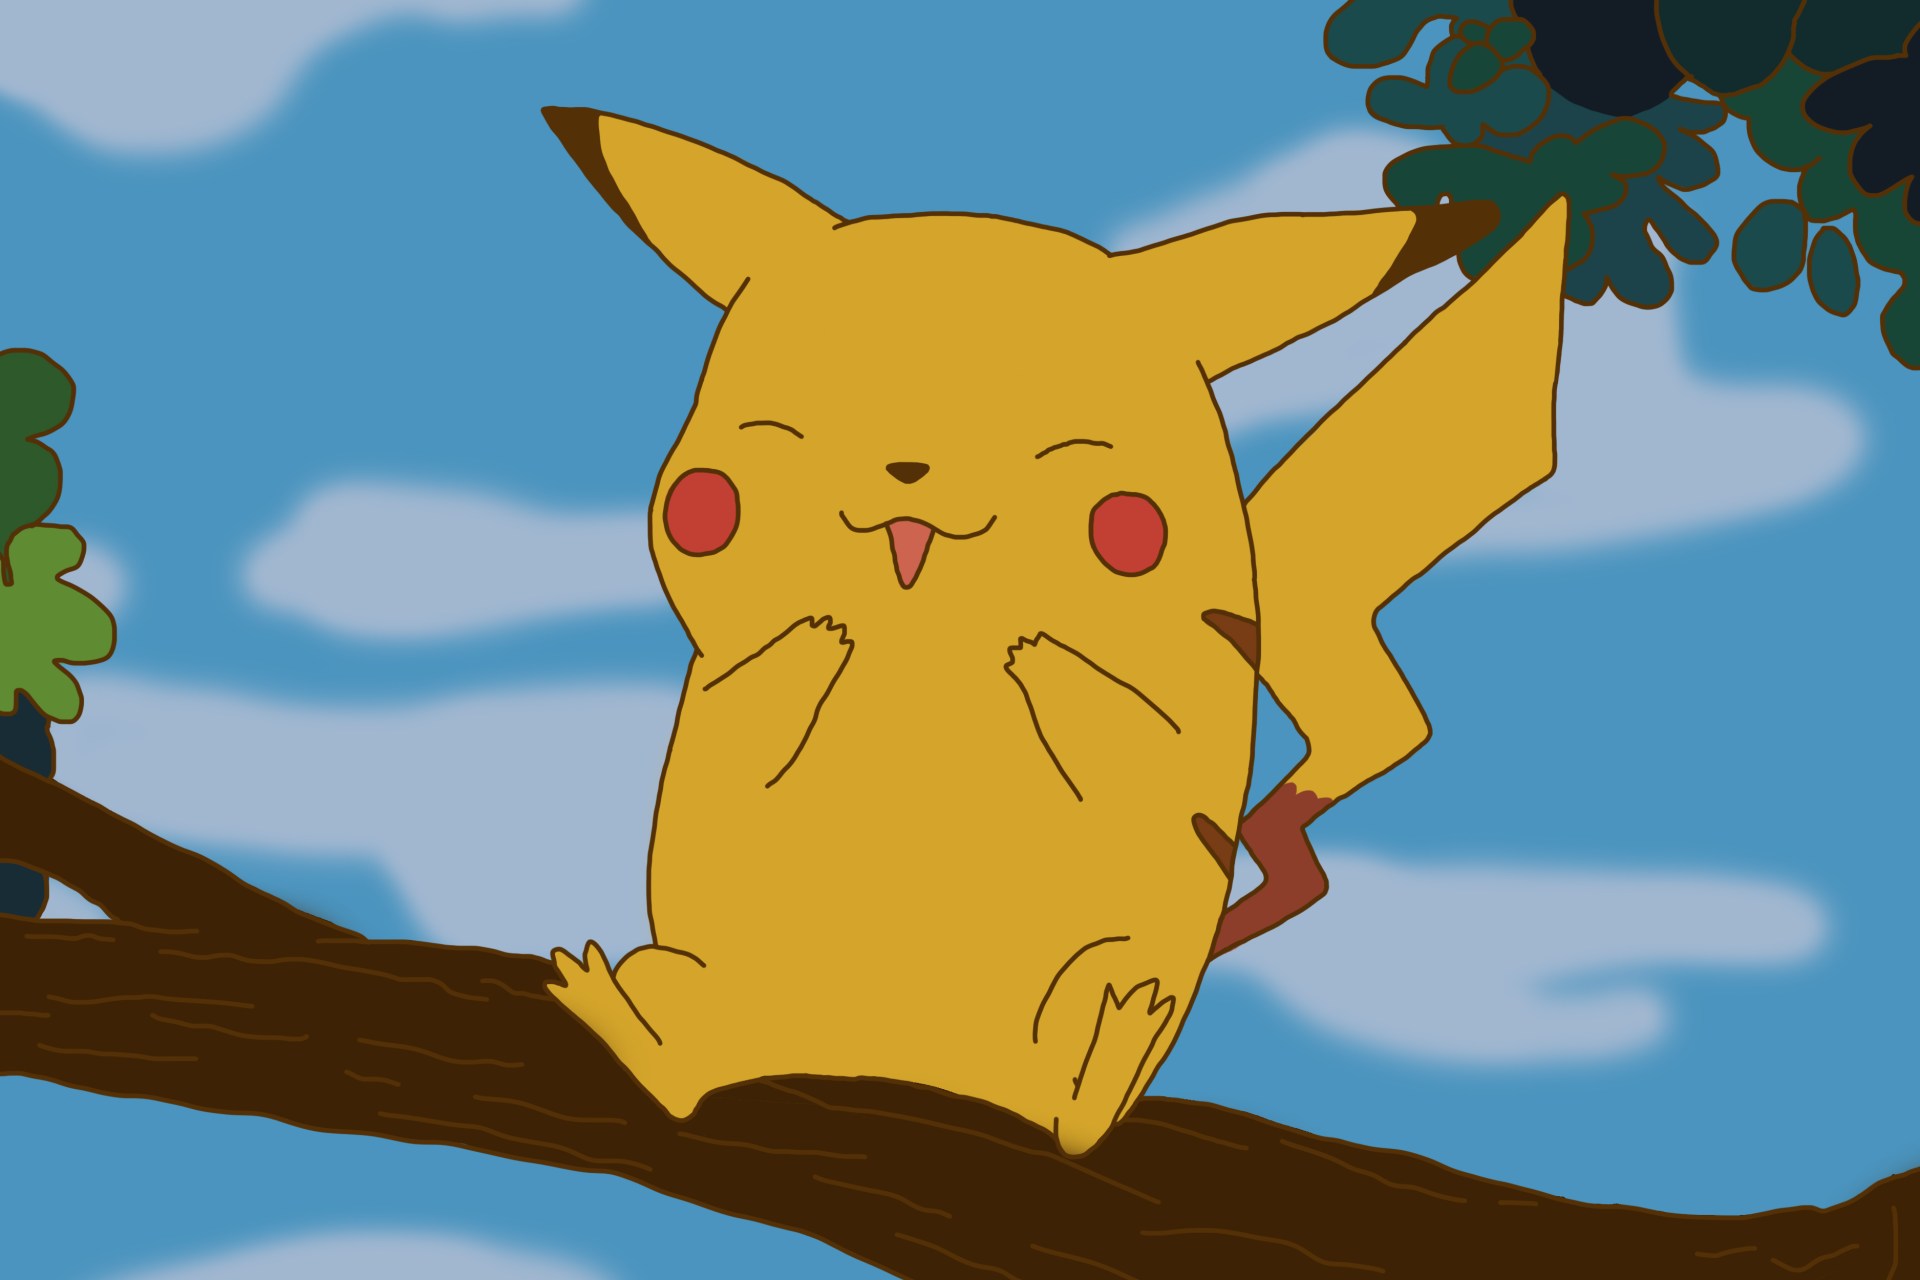 50 Pokemon Puns That Will Make You Laugh Your Ash Off | Thought Catalog